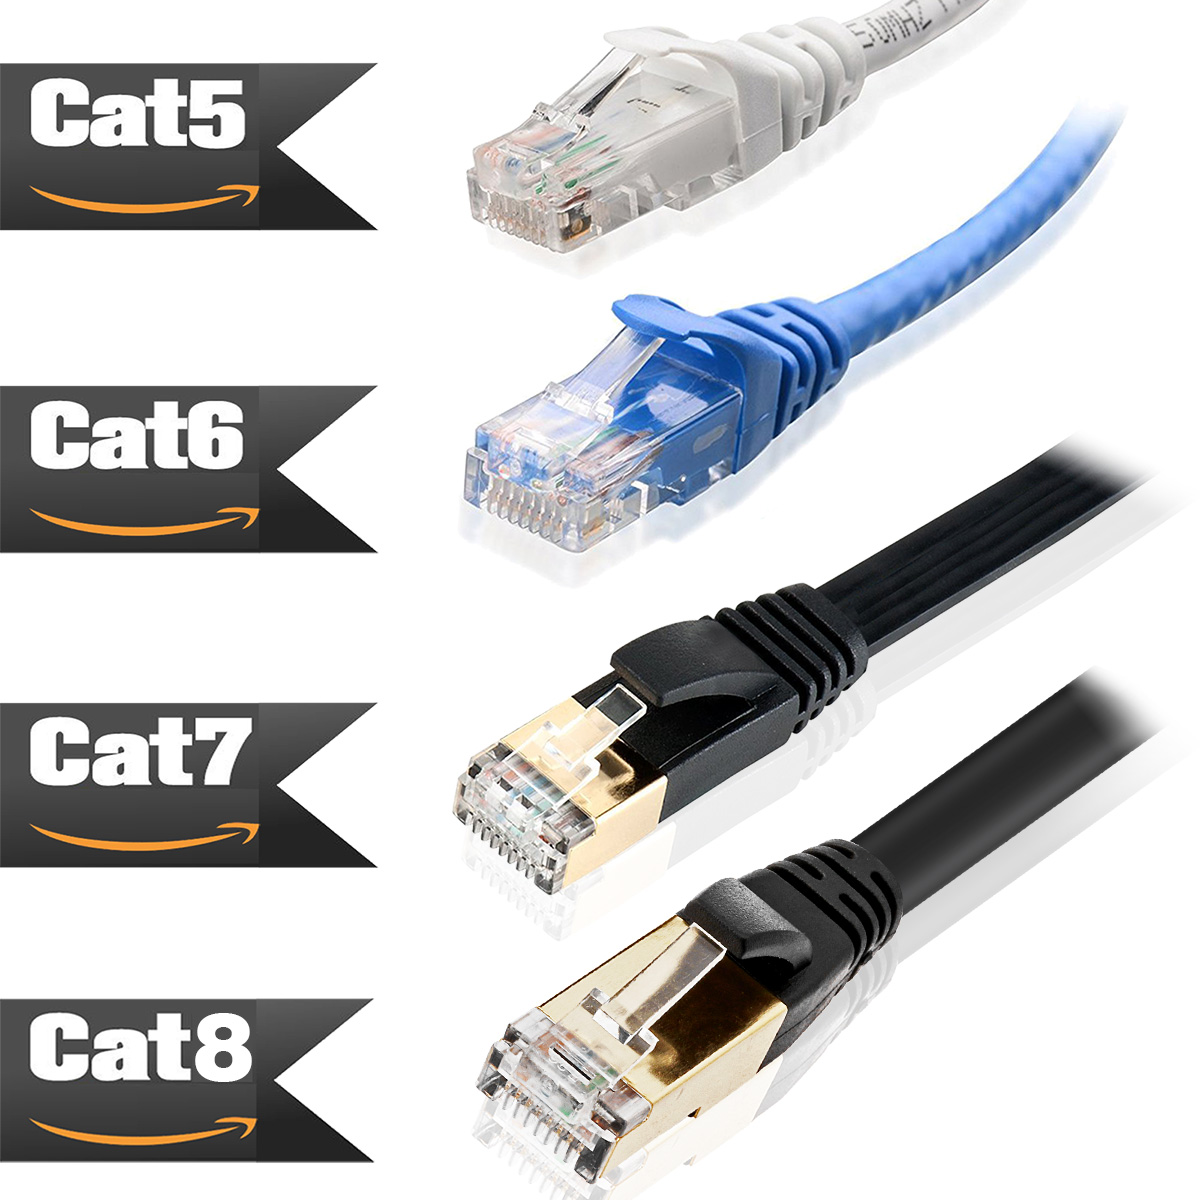 2019 PREMIUM Ethernet Cable CAT 8 7 Ultra High Speed LAN ...